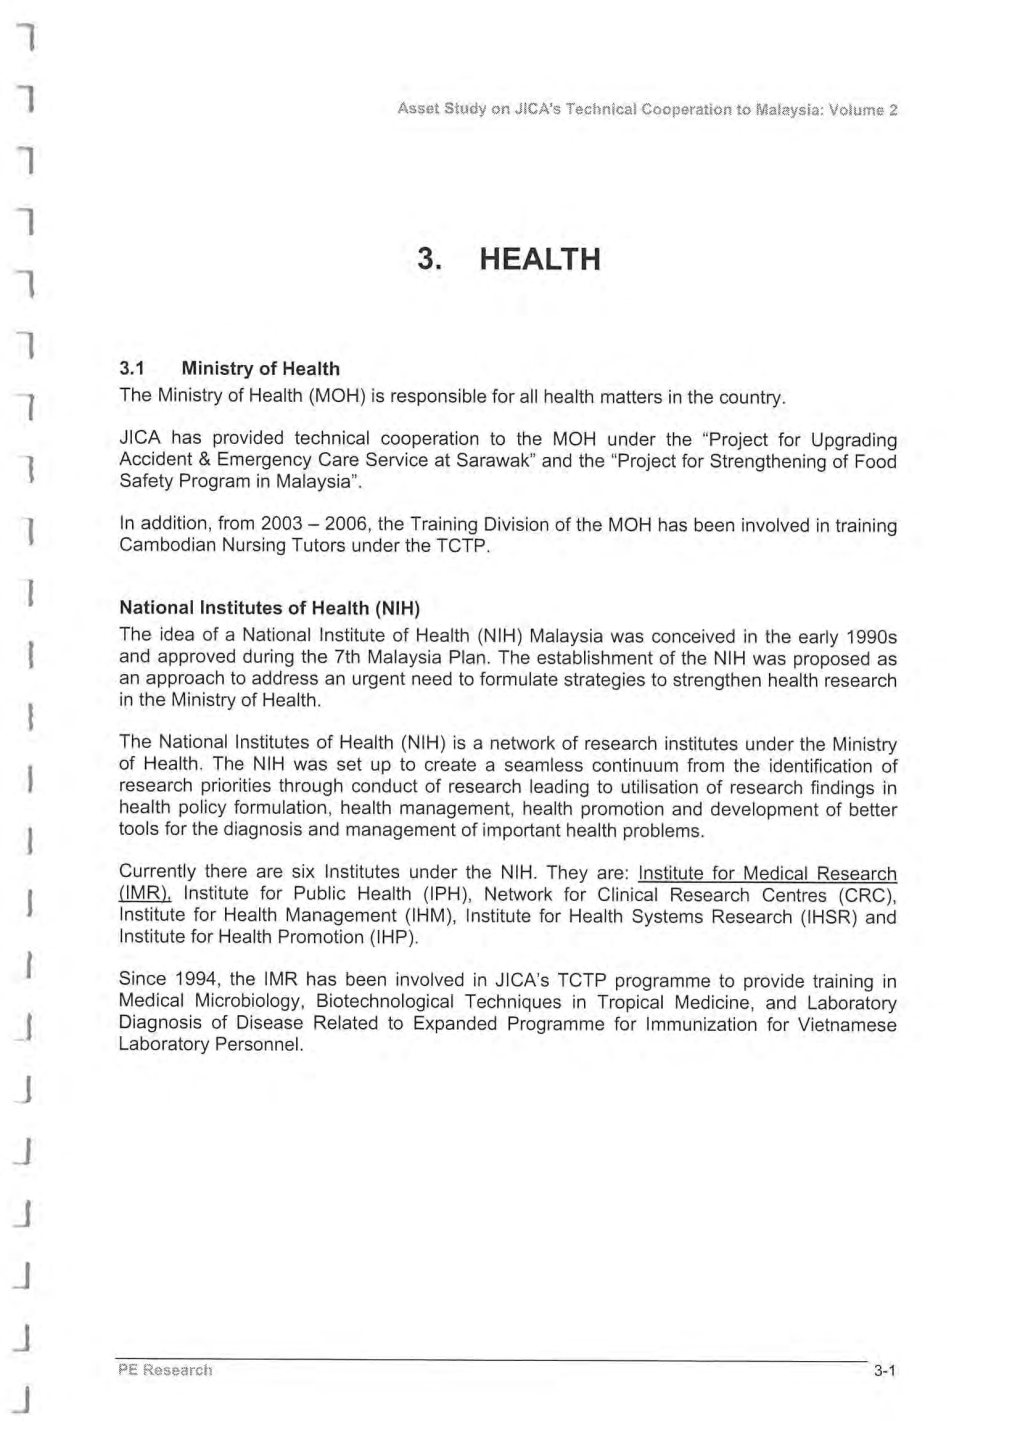 3. HEALTH L L 3.1 Ministry of Health L the Ministry of Health (MOH) Is Responsible for All Health Matters in the Country